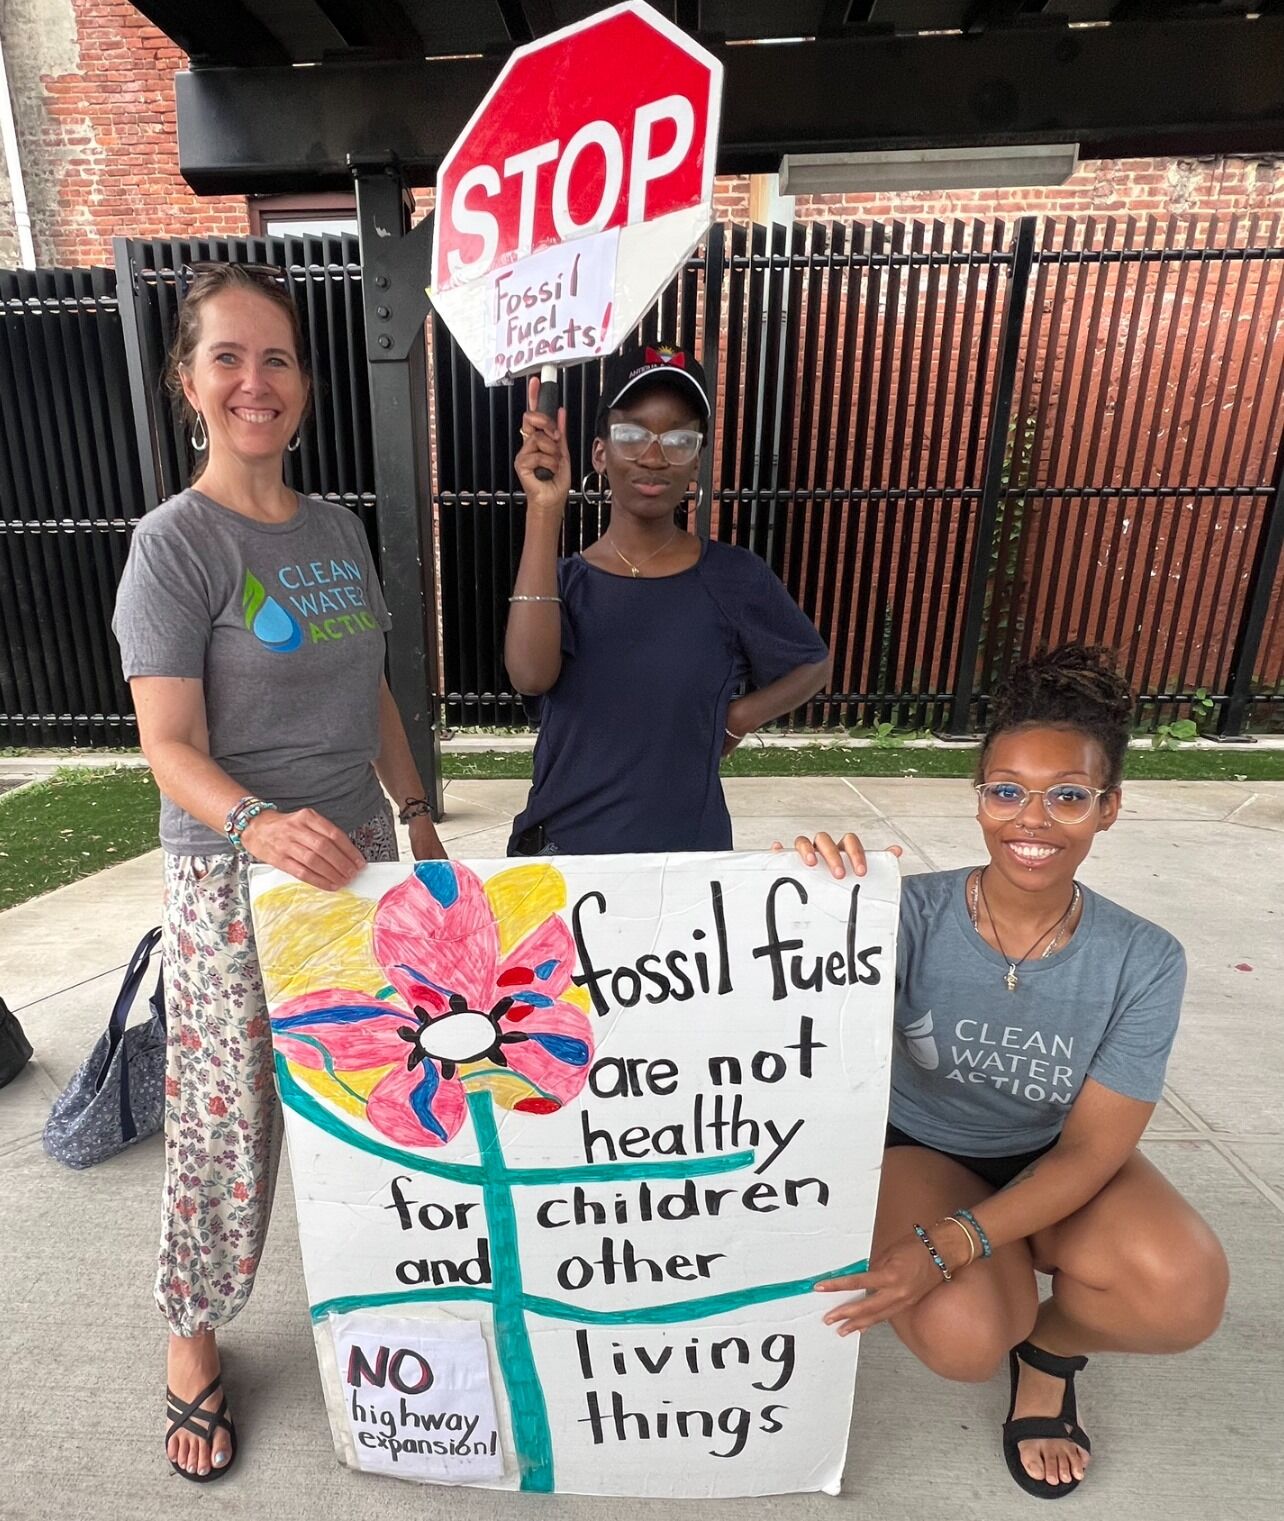 New Jersey Clean Water staff wtih signs: "Stop Fossil Fuels" "Fossil Fuels are not healthy for children and other living things"